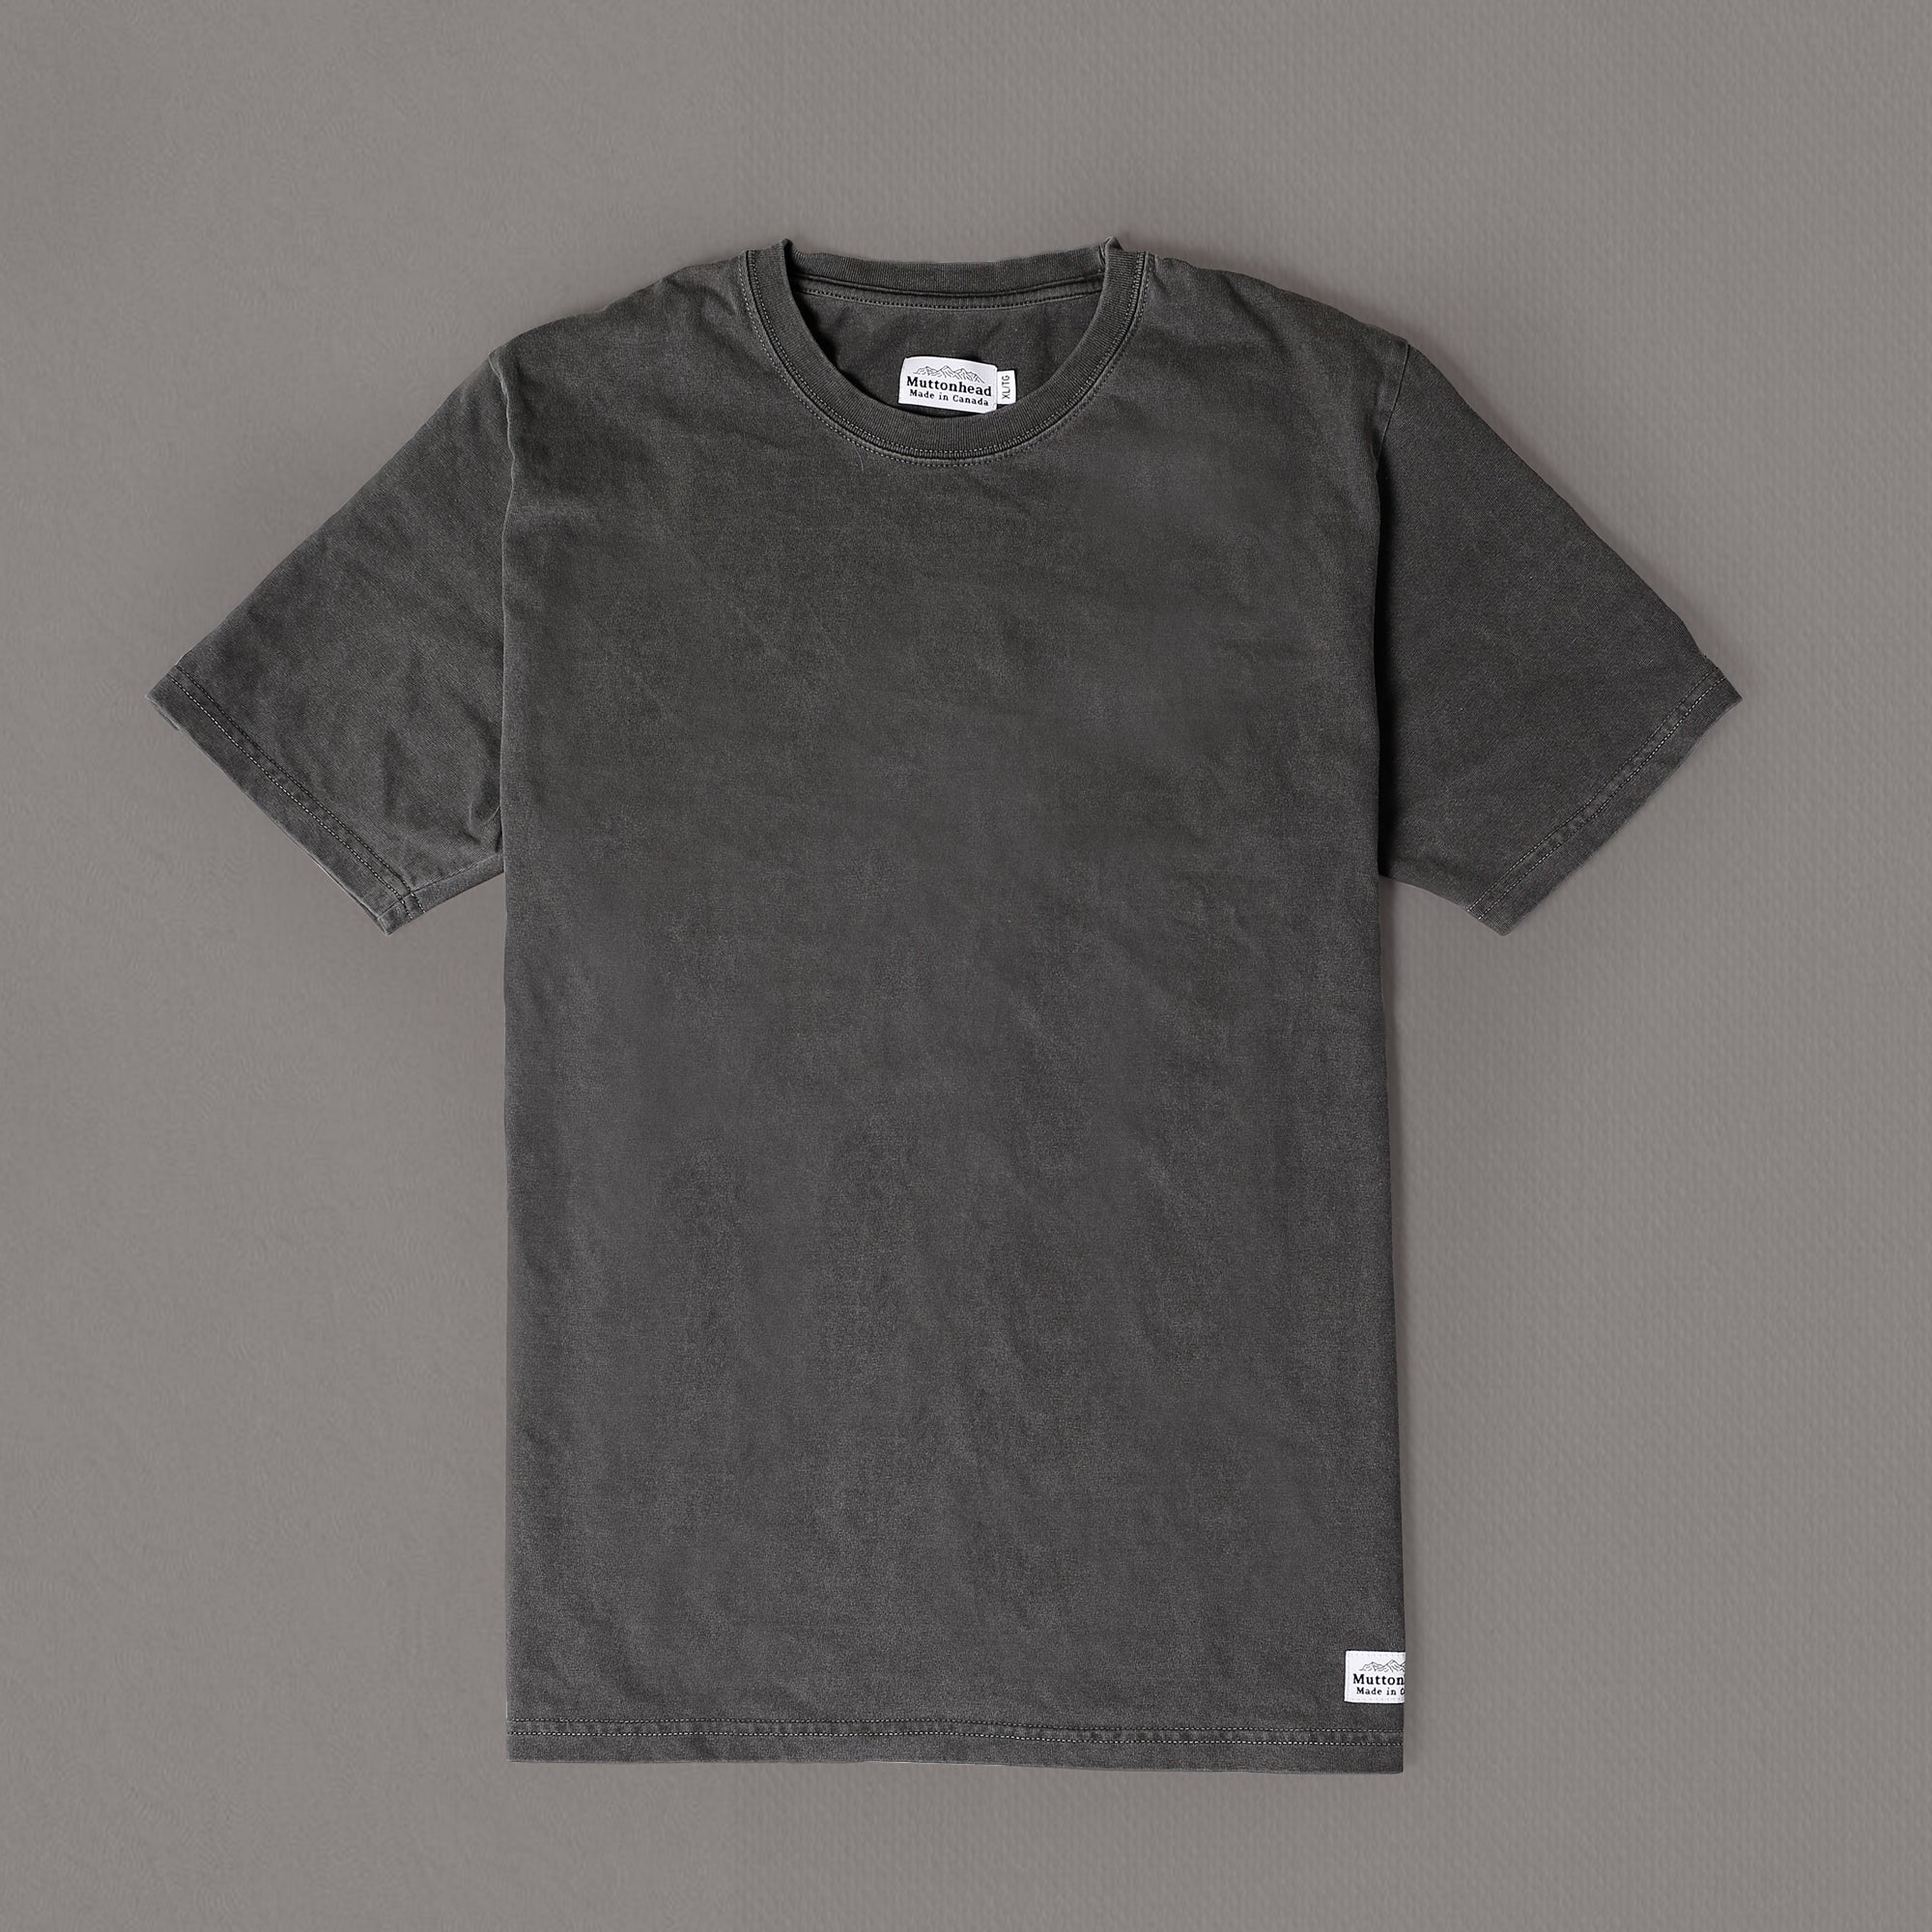 Heavy Weight Tee - Washed Black